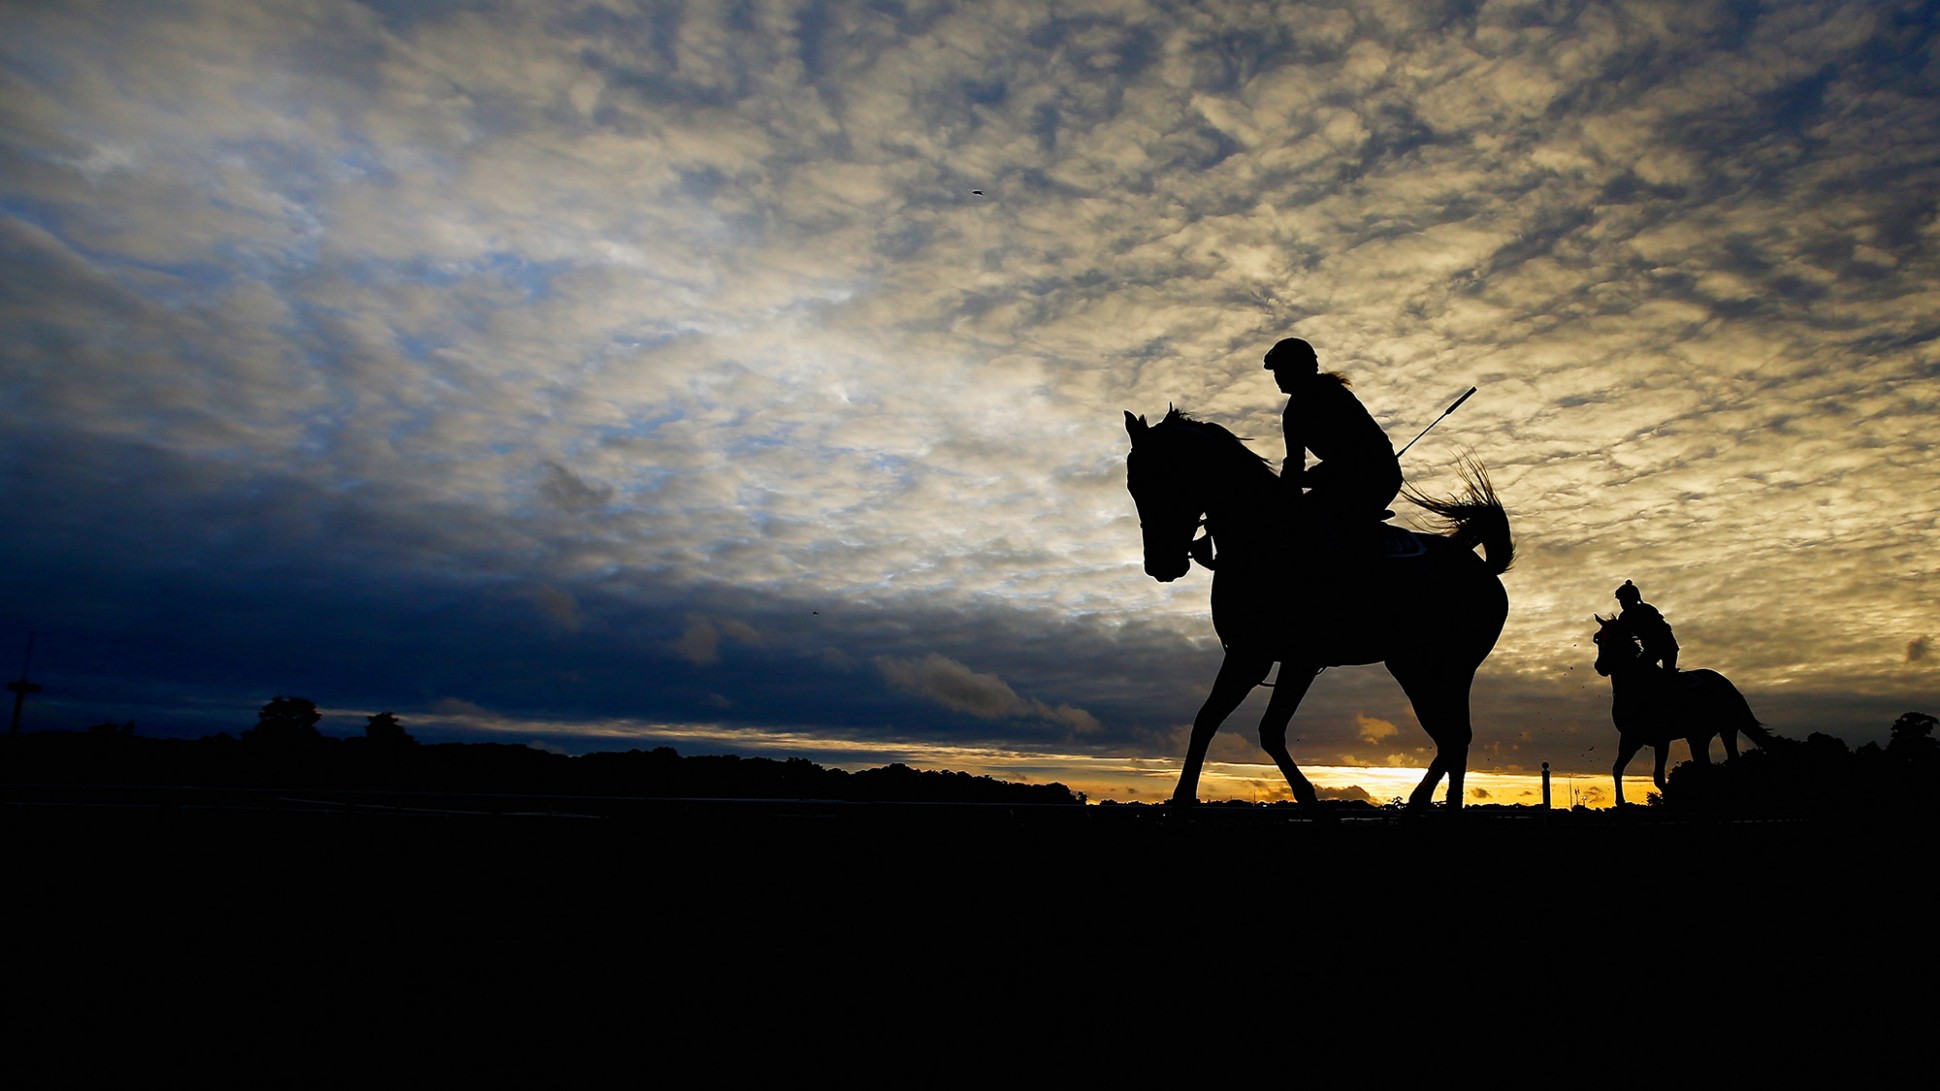 horse racing, horses, sports, sky, silhouette, 2015, belmont stakes